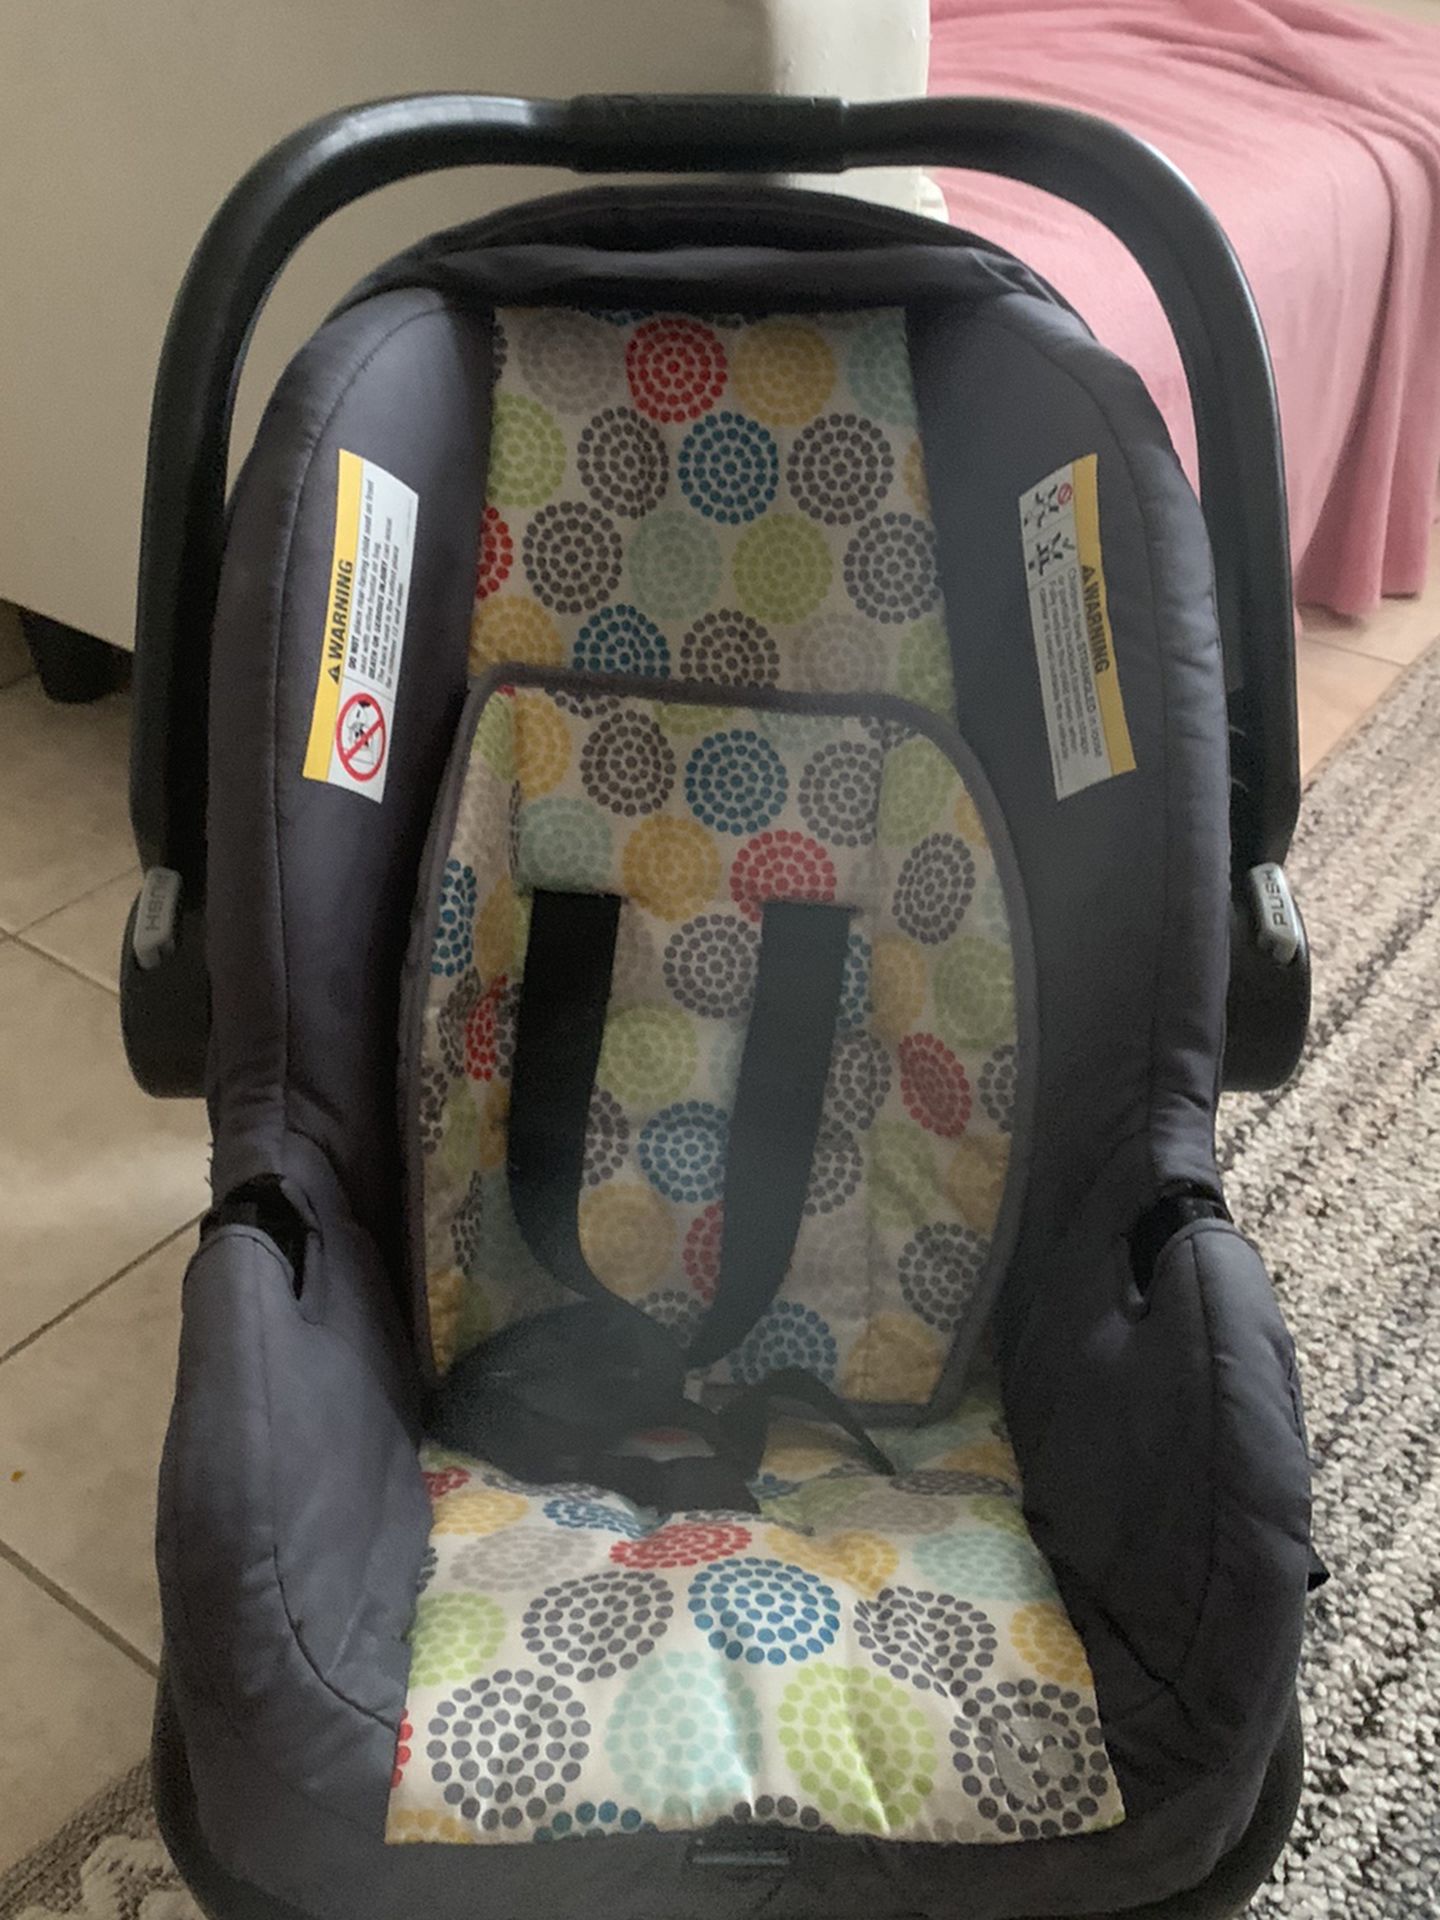 FREE INFANTS CAR SEAT WITH BASE